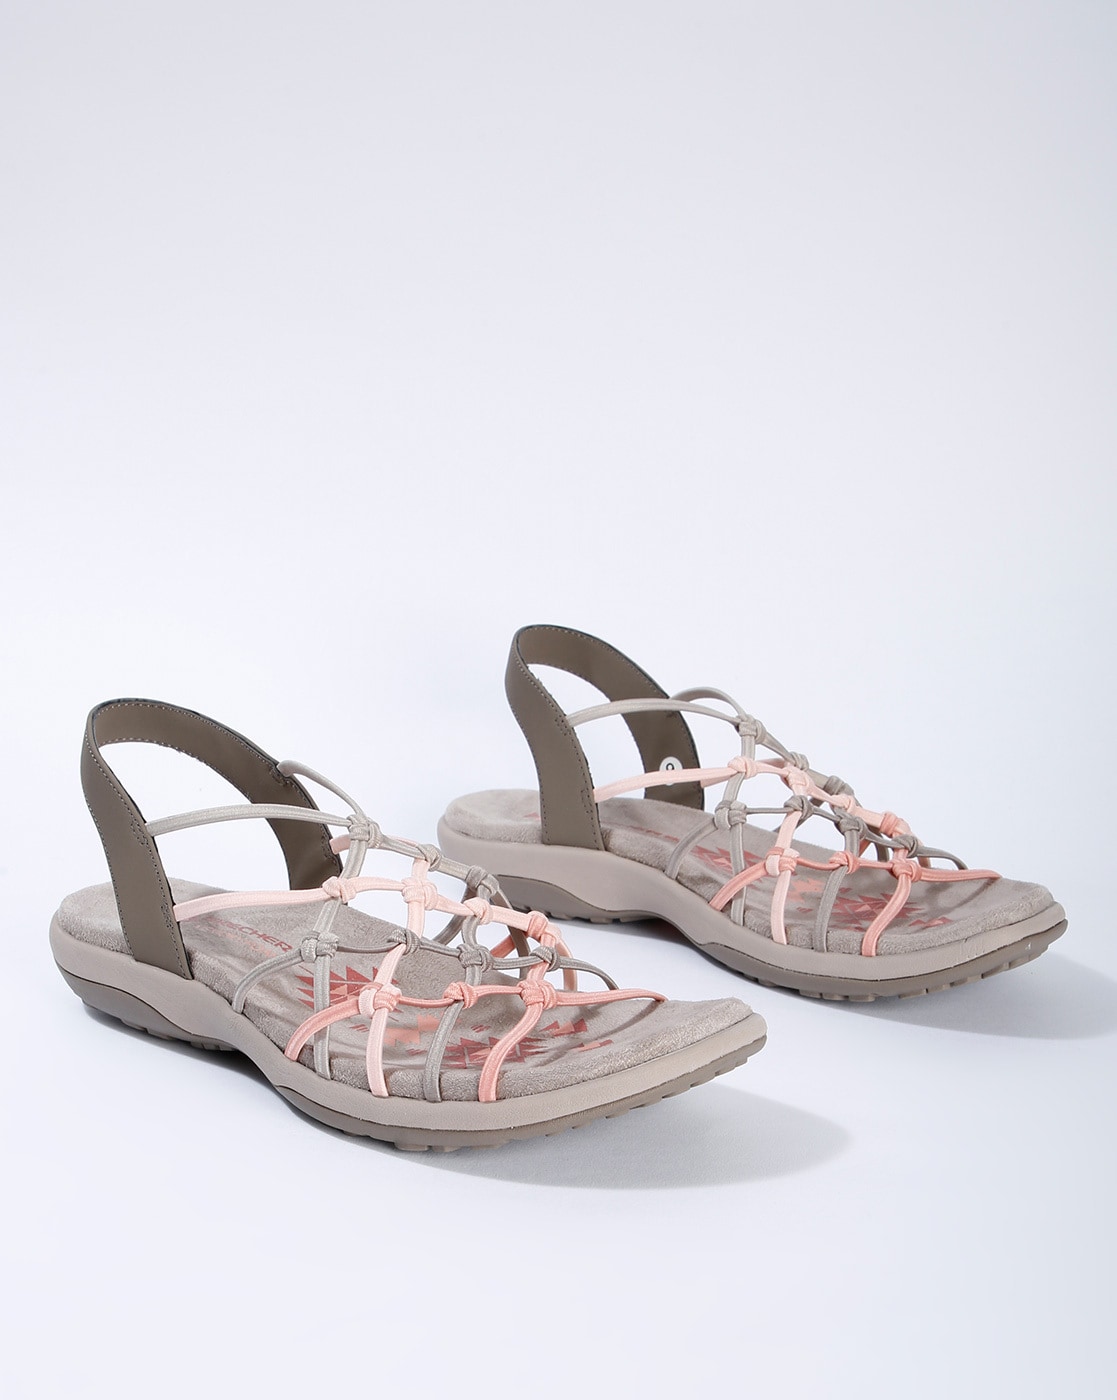 skechers strappy flat sandals with slingback